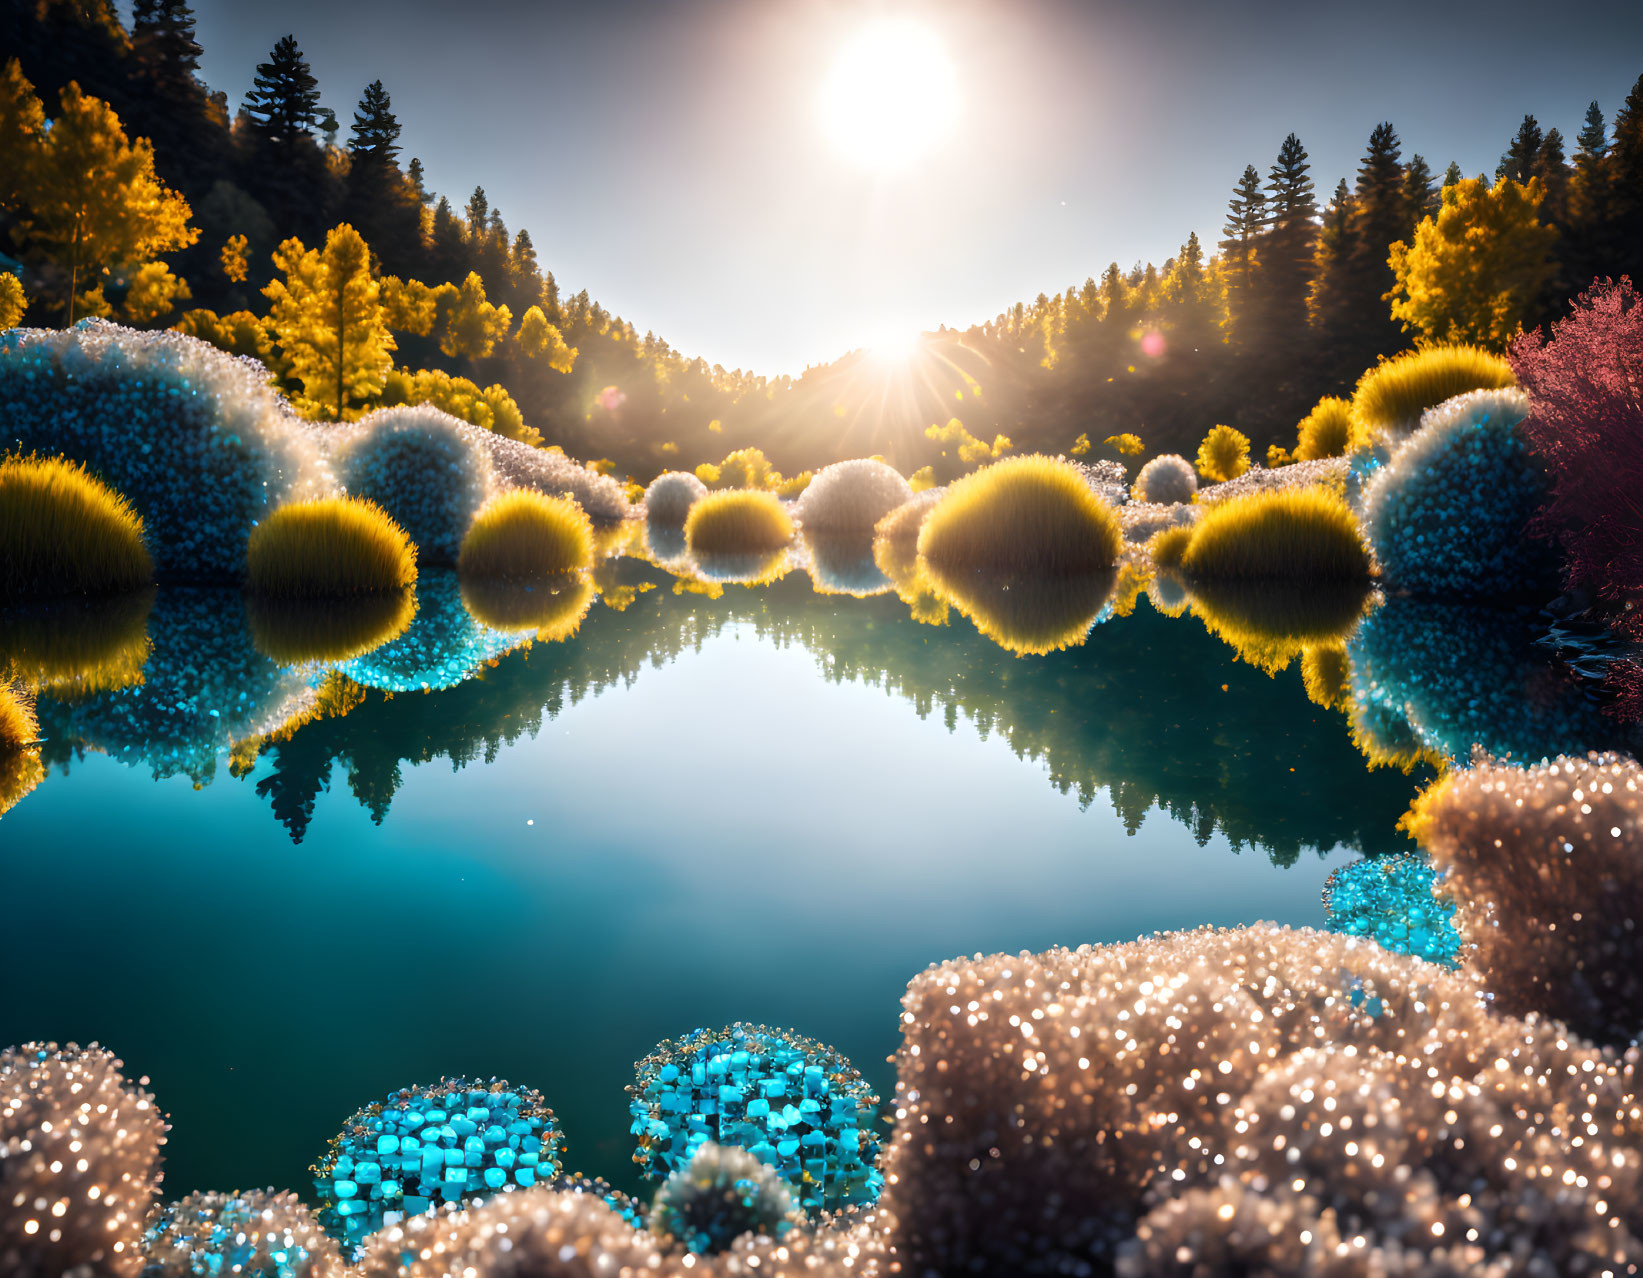 Tranquil Lake Sunrise with Colorful Fractal Structures